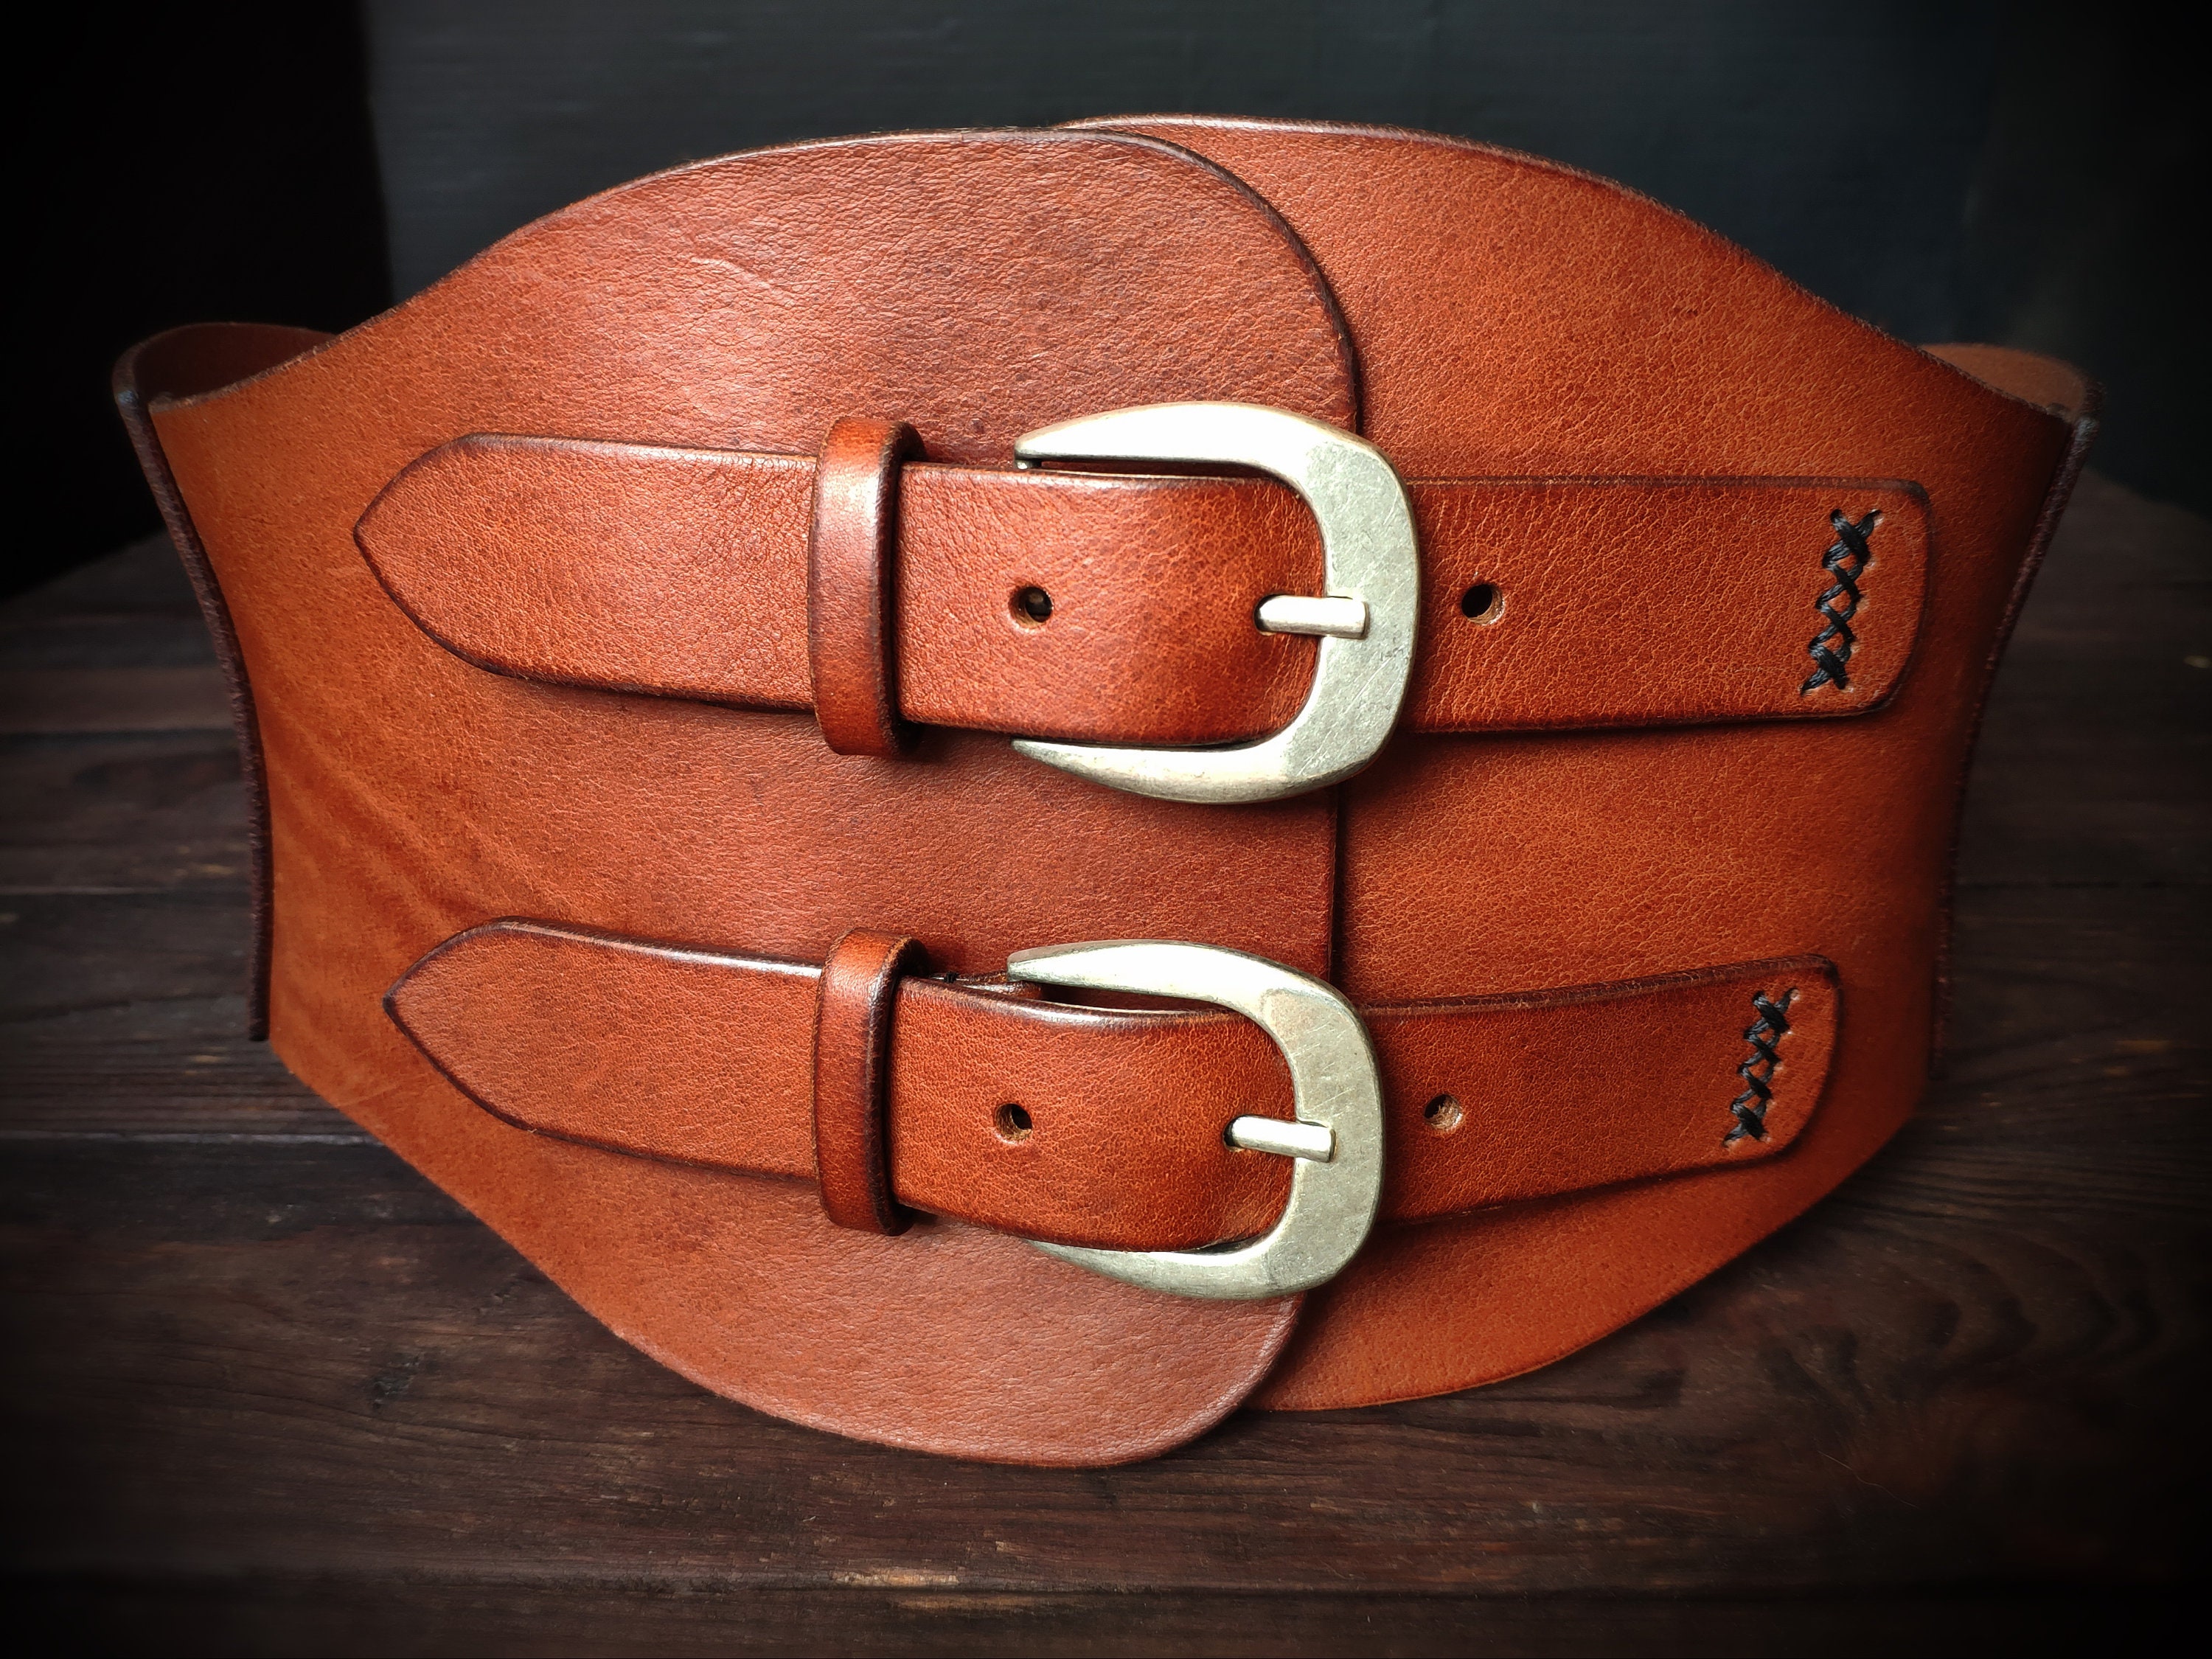 👉Know the Tools You Need to MAKE a BEAUTIFUL Leather DYI BELT at Home